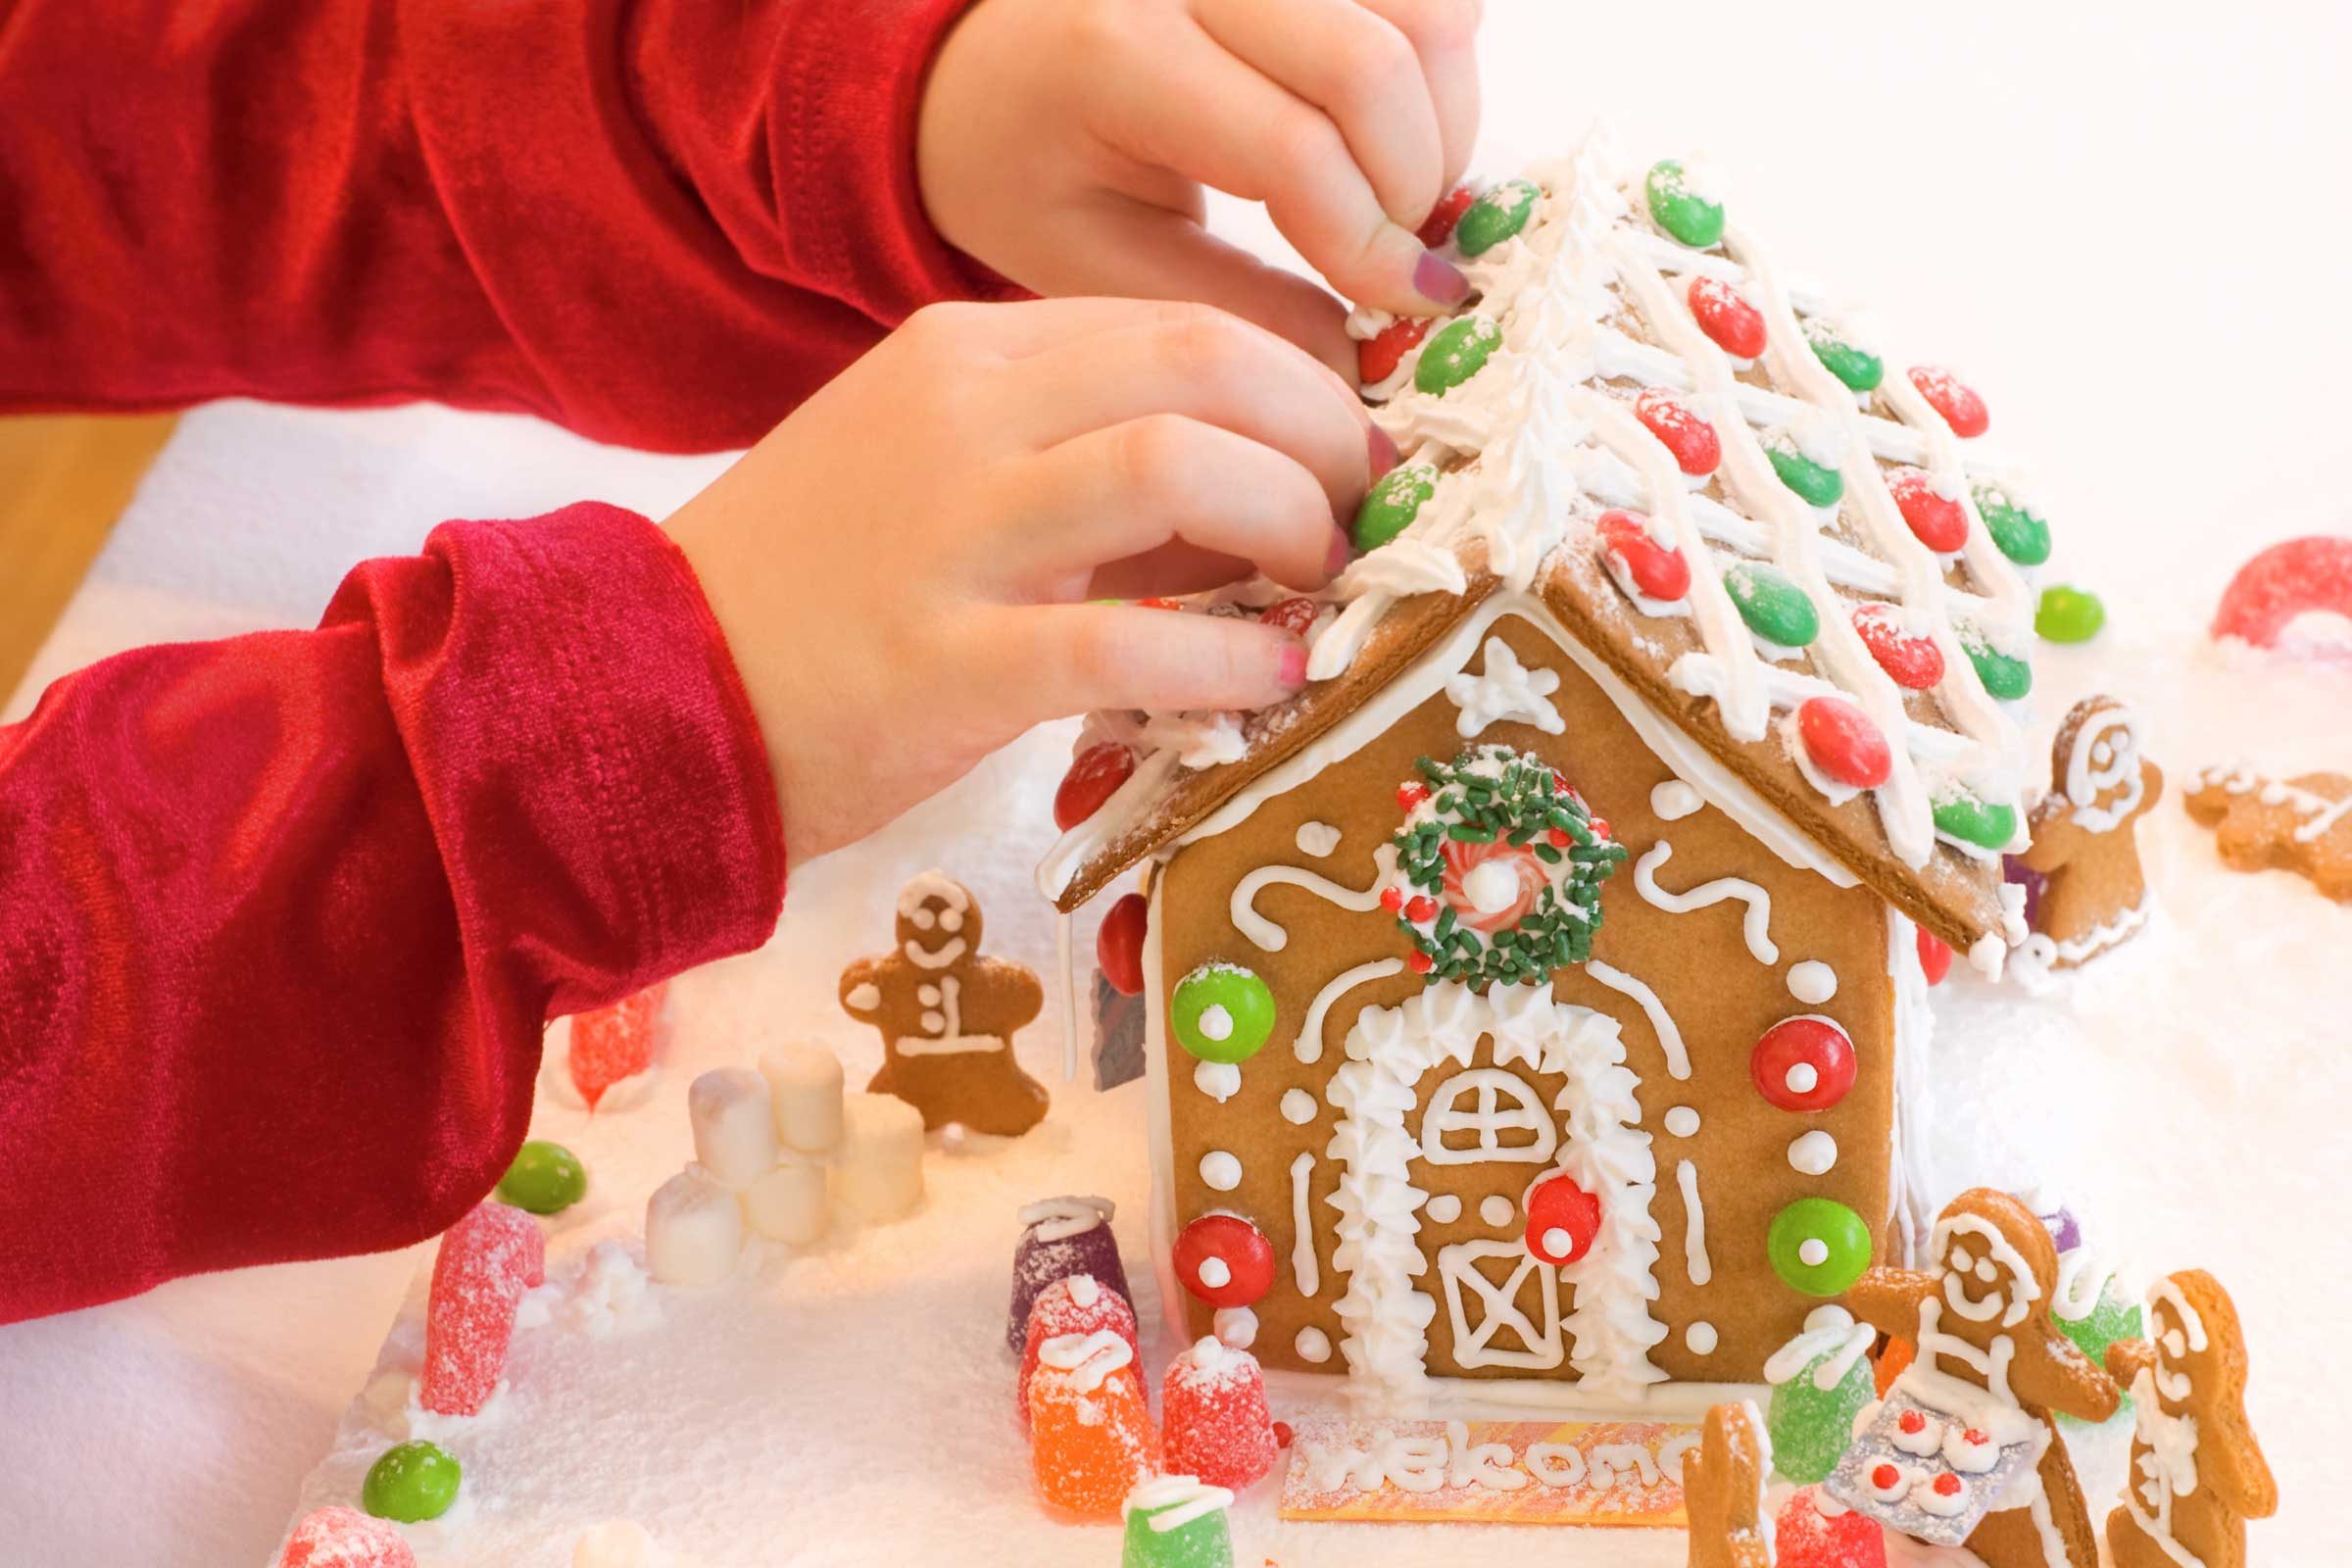 Gingerbread House Ideas and Decorating Tips | Reader's Digest2400 x 1600